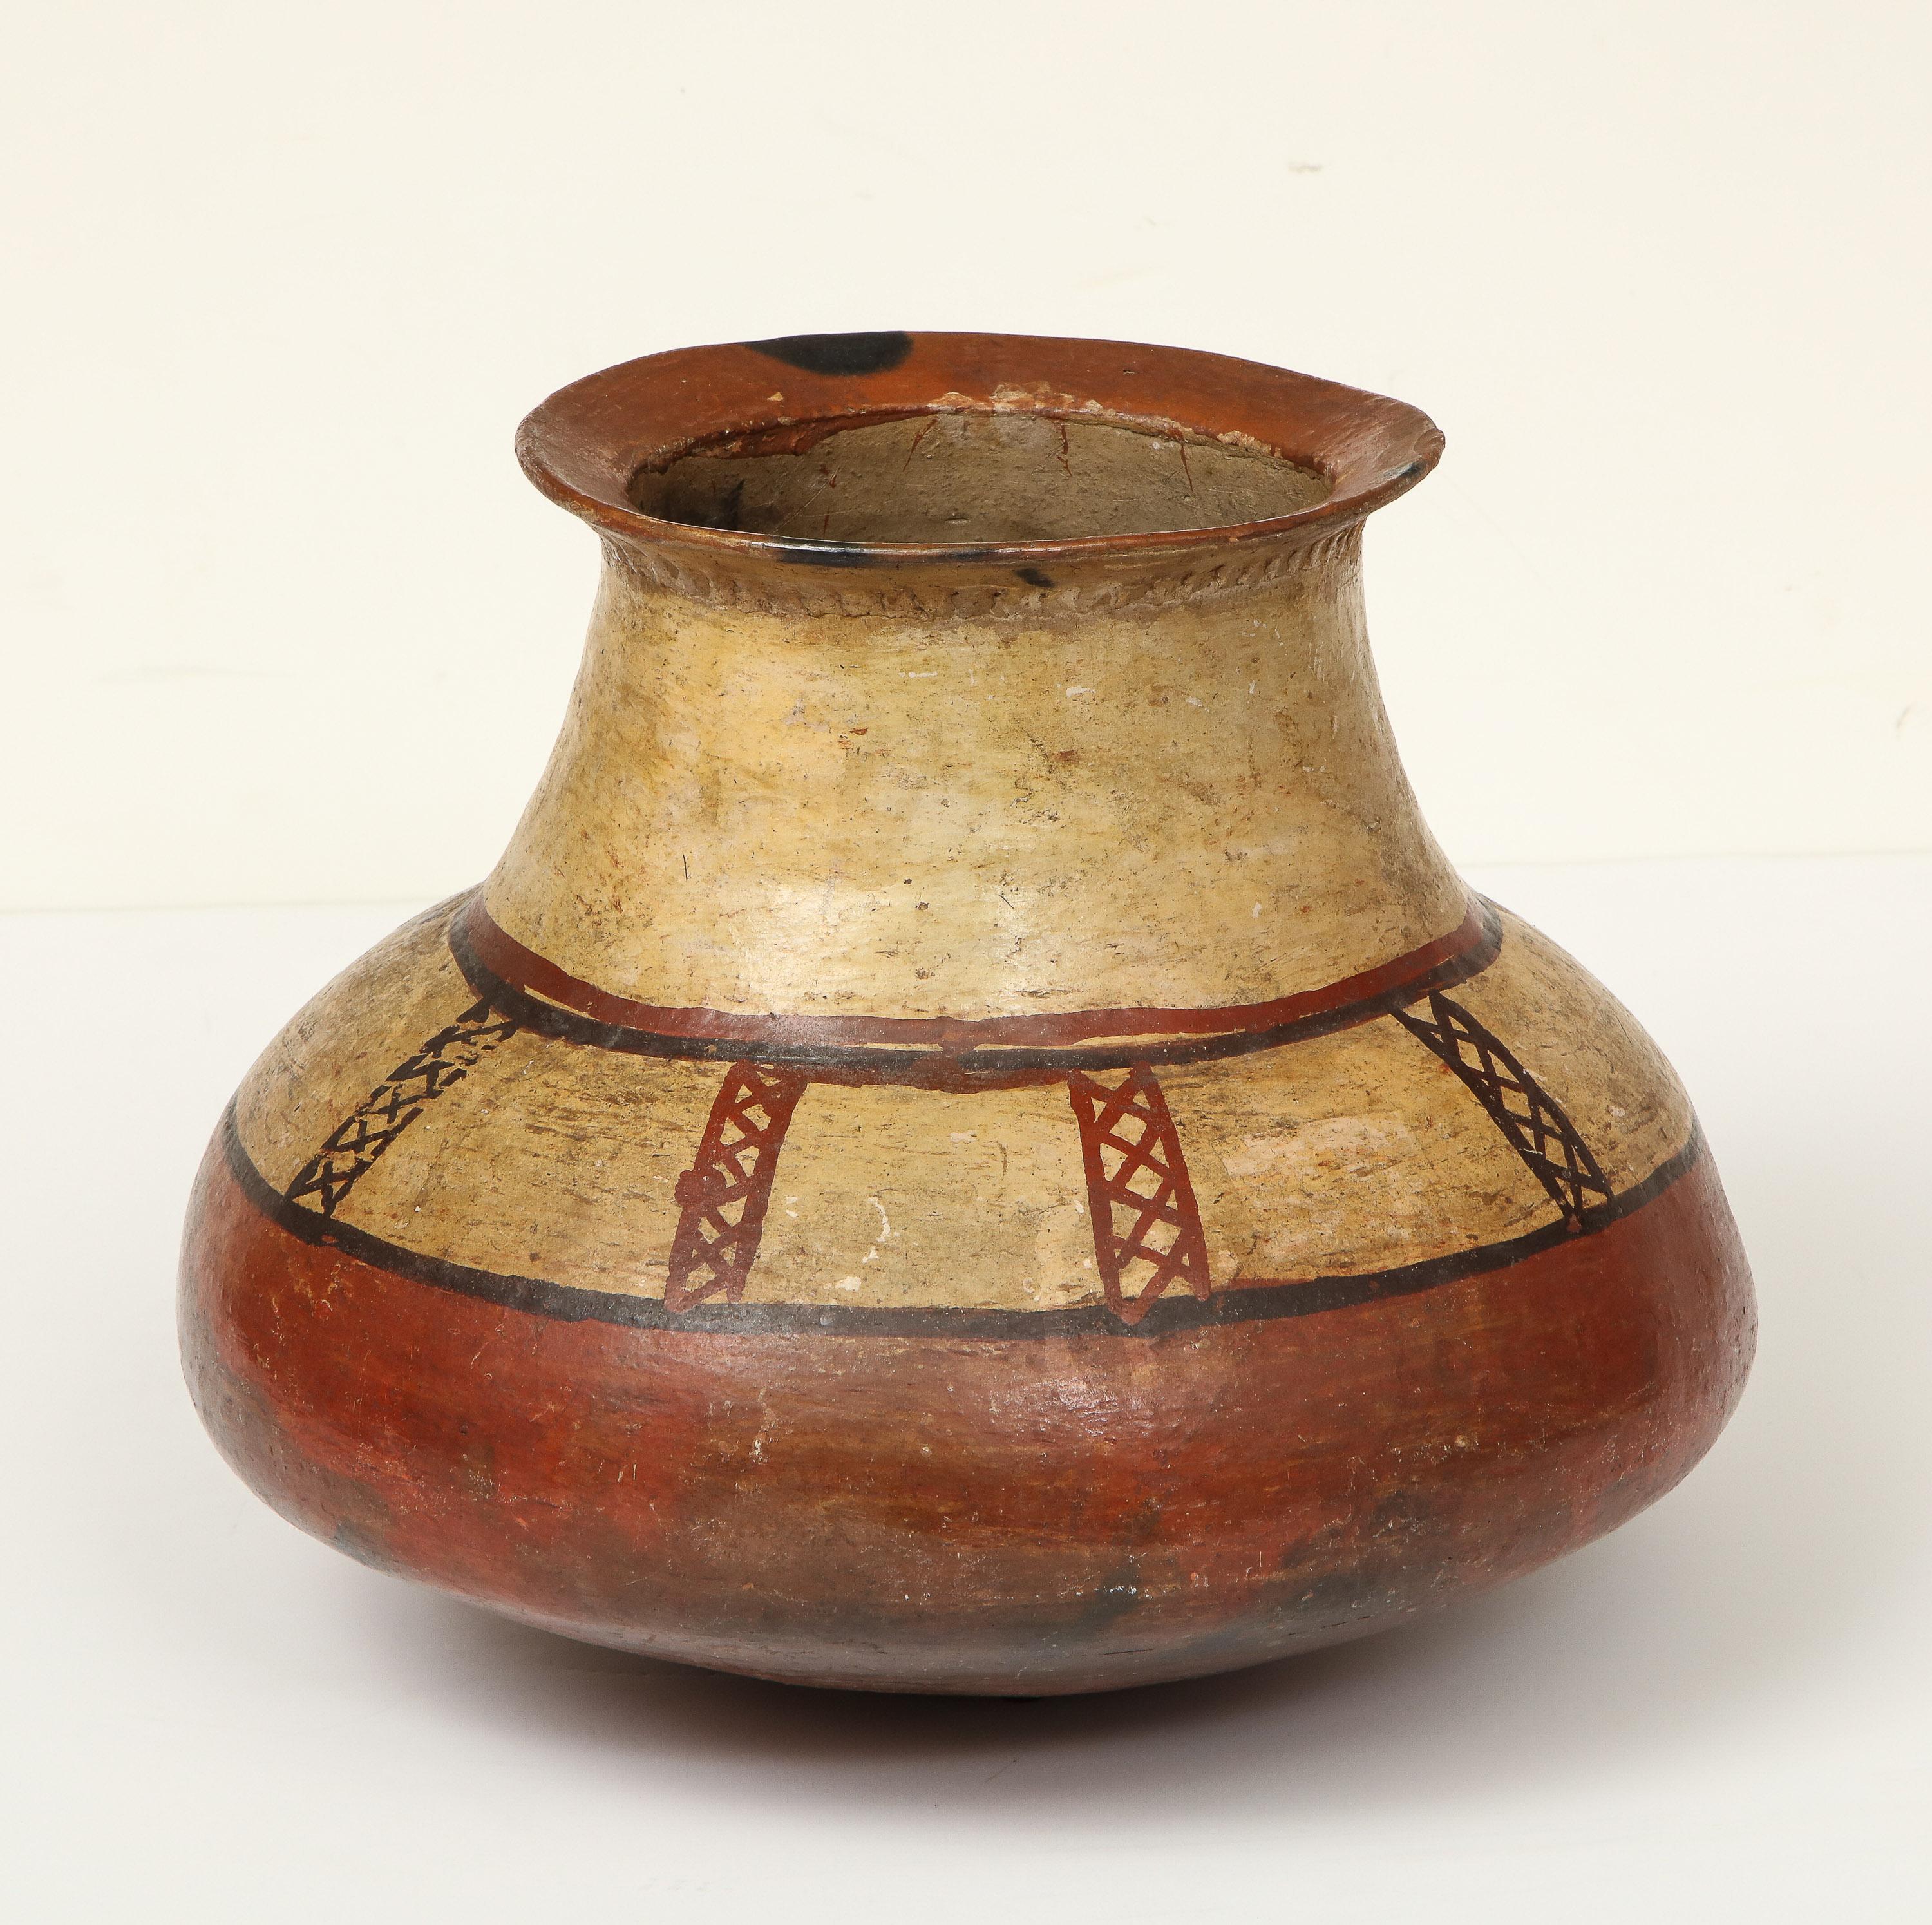 Pottery bowl from South America, The Andes.